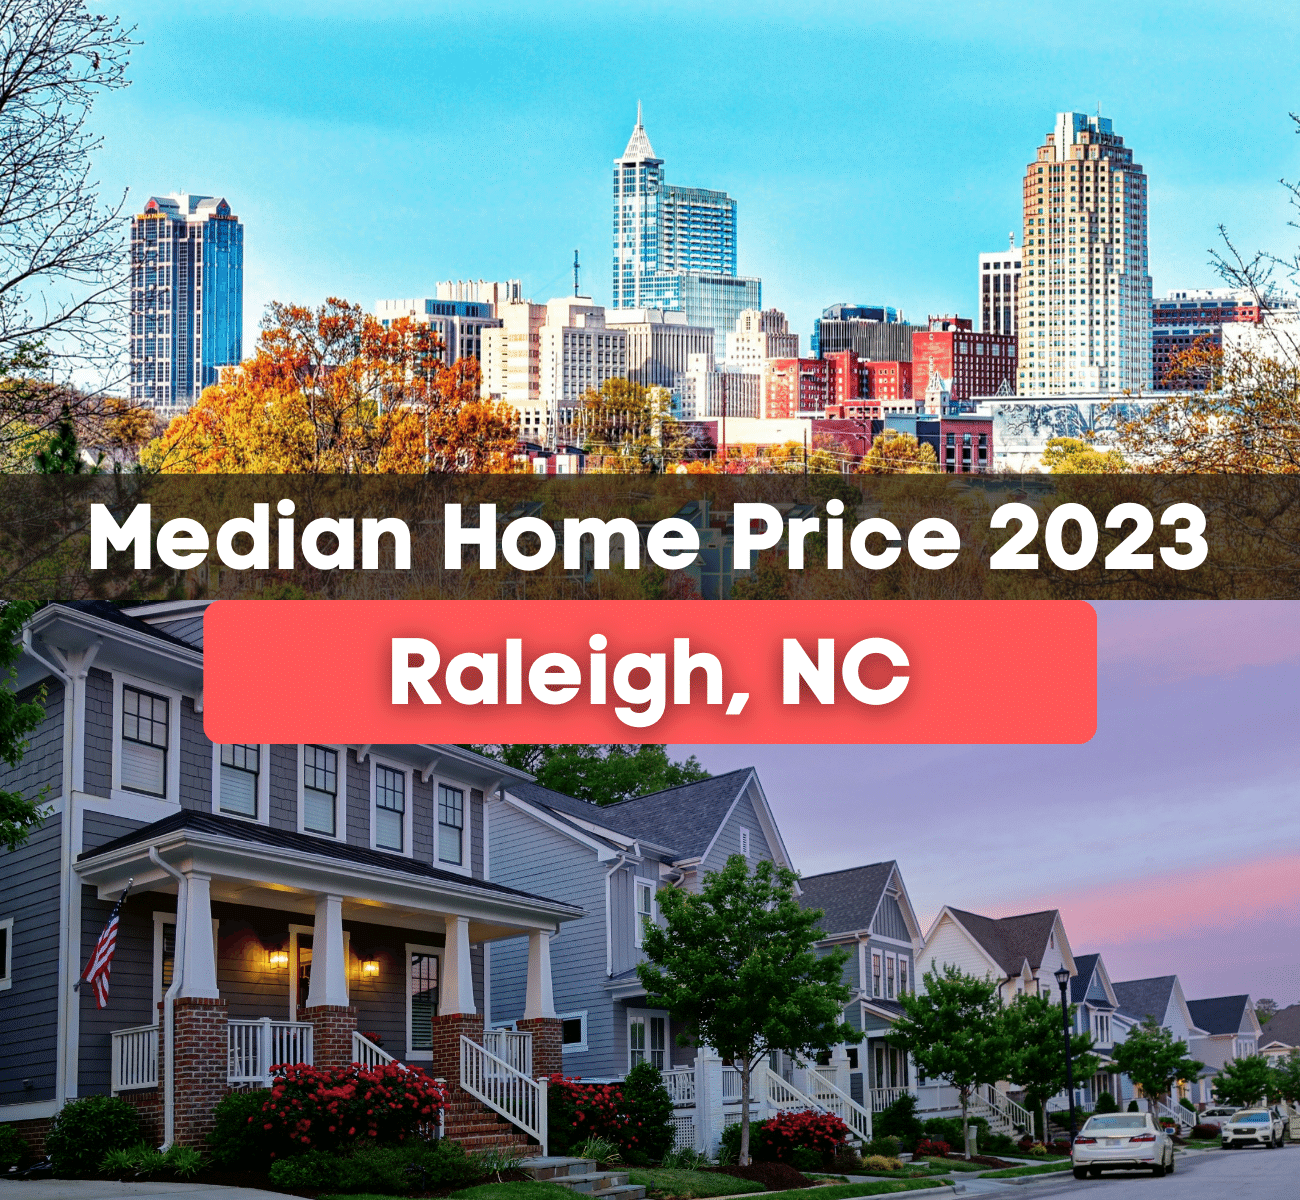 Raleigh, North Carolina Median Home Price in 2023